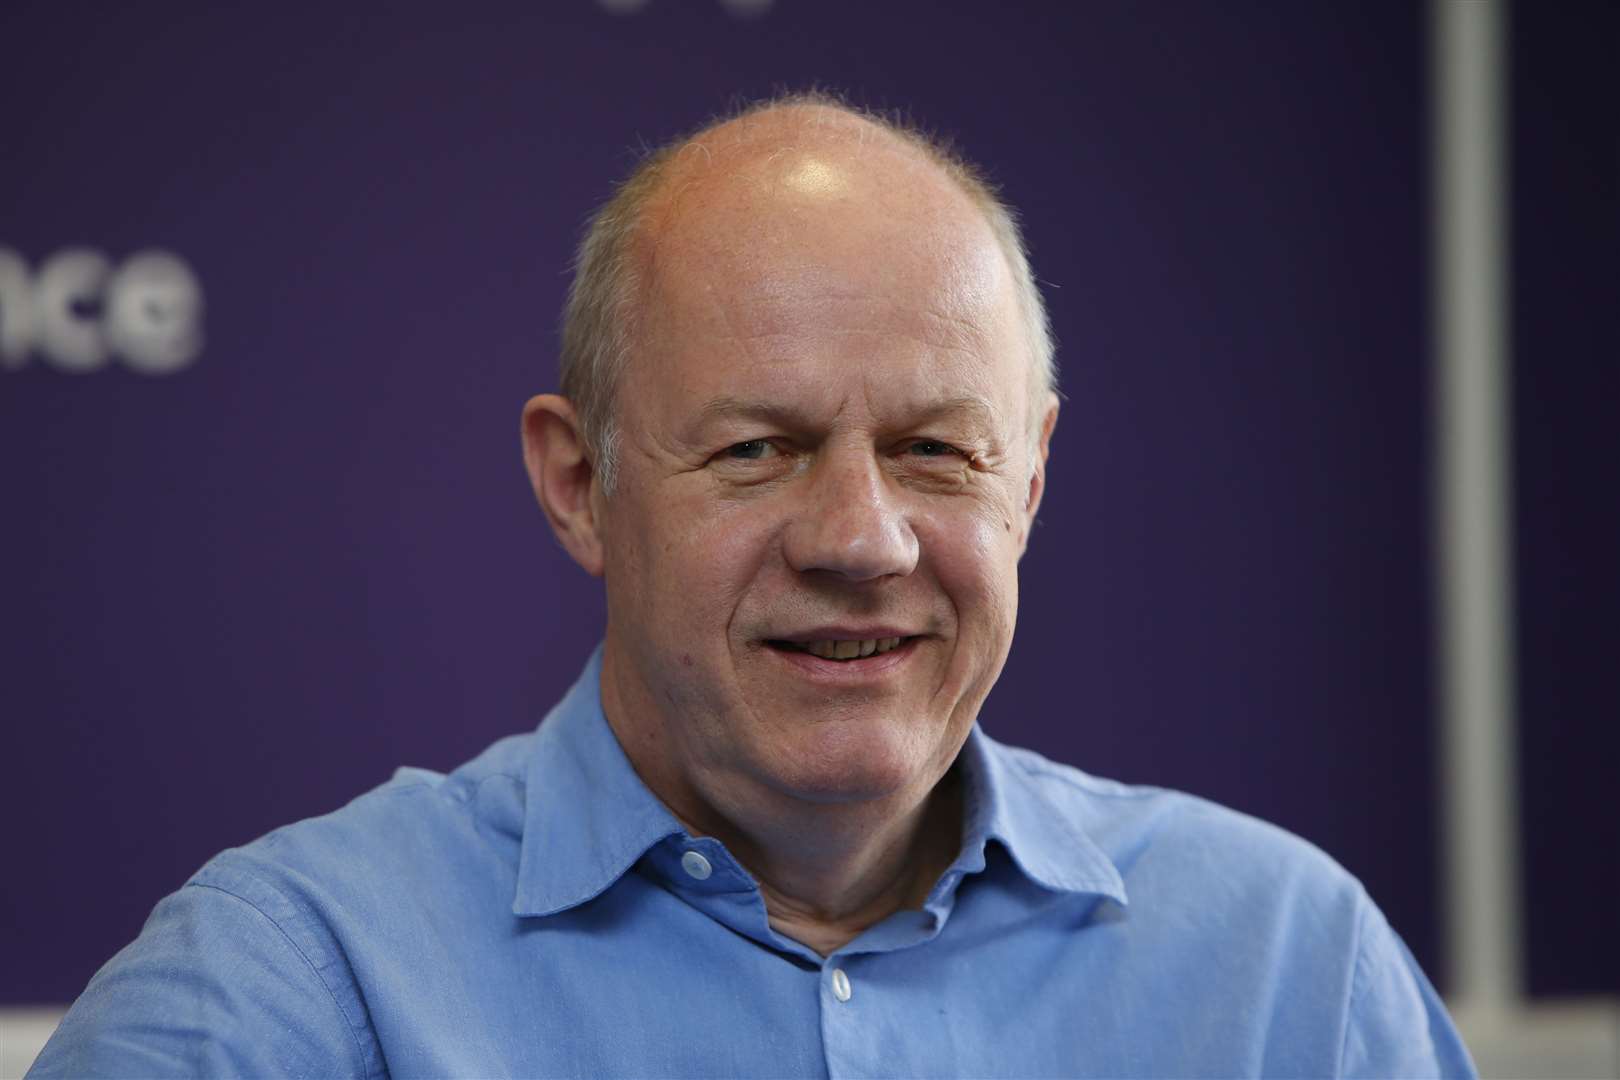 Damian Green said that the news was concerning. Picture: Andy Jones